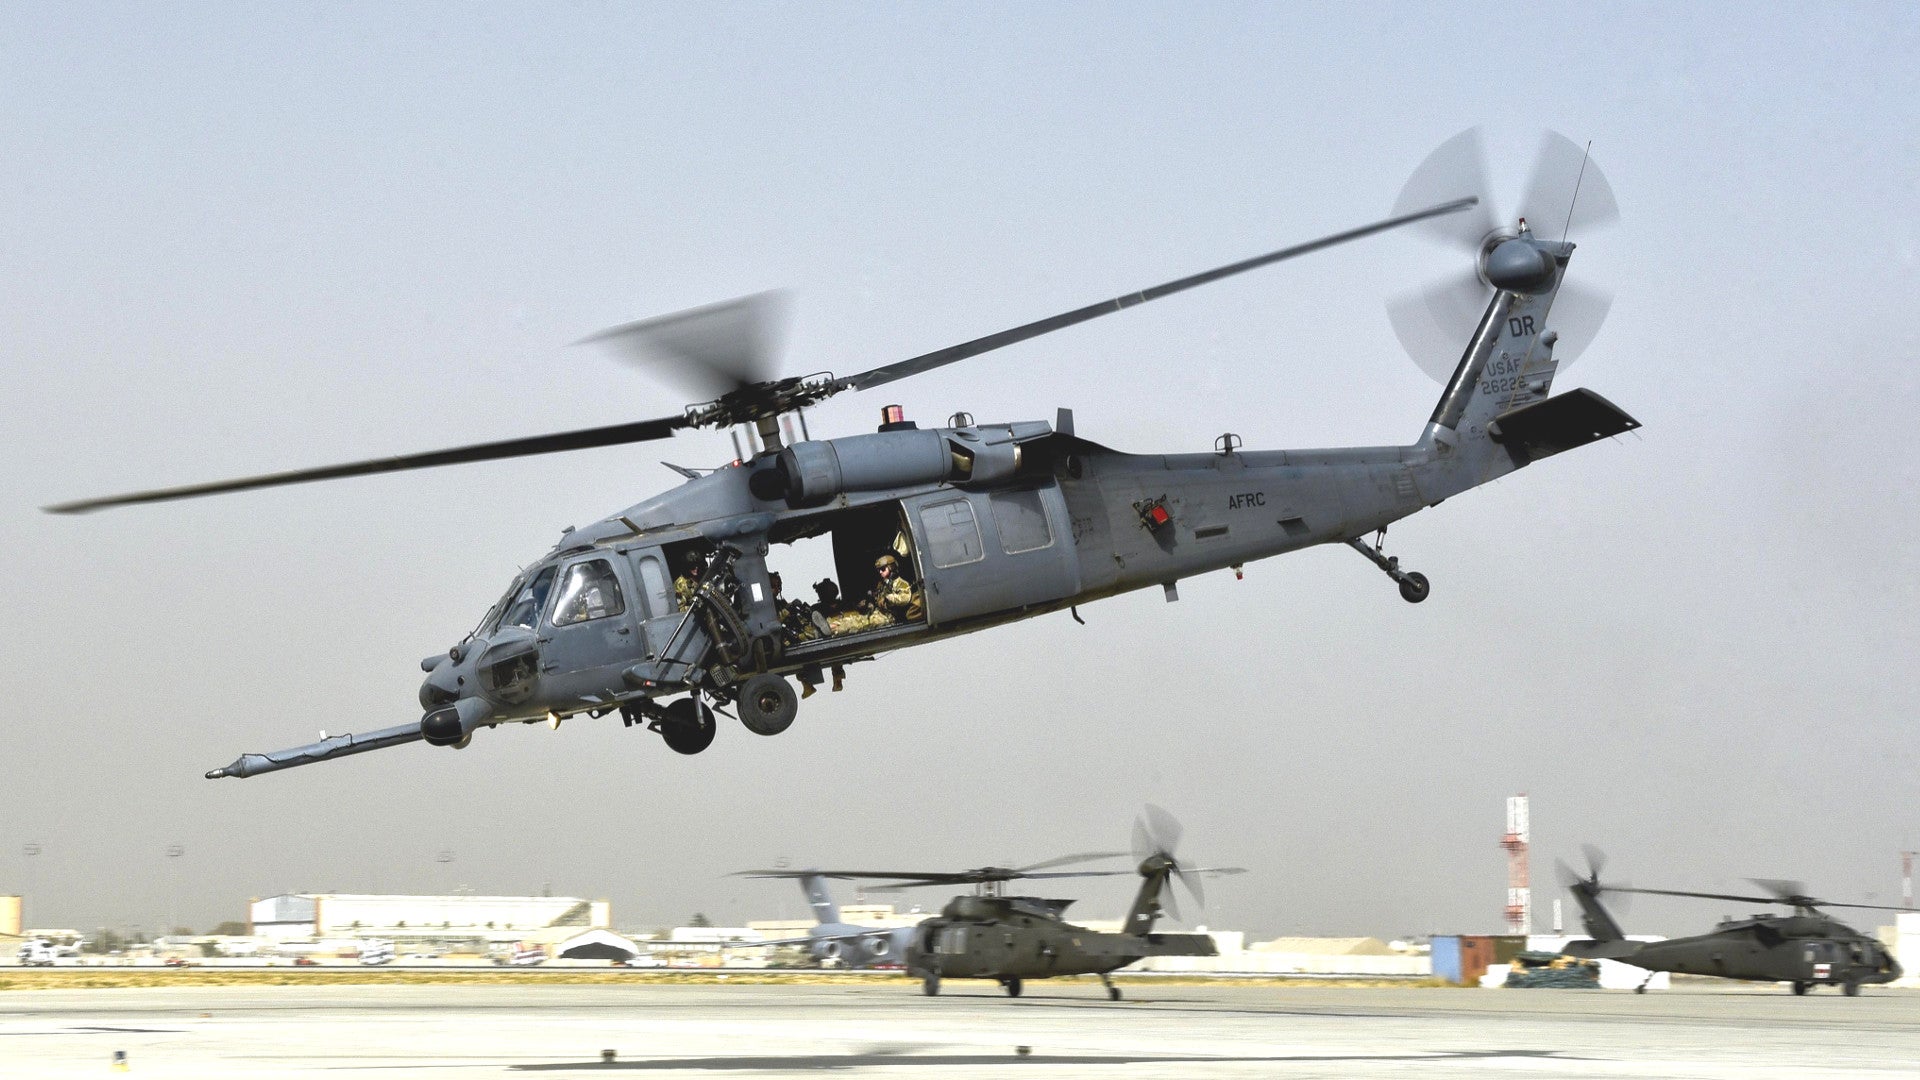 The US Is Crafting a Joint Air Force-Army Search and Rescue Super Team in Afghanistan